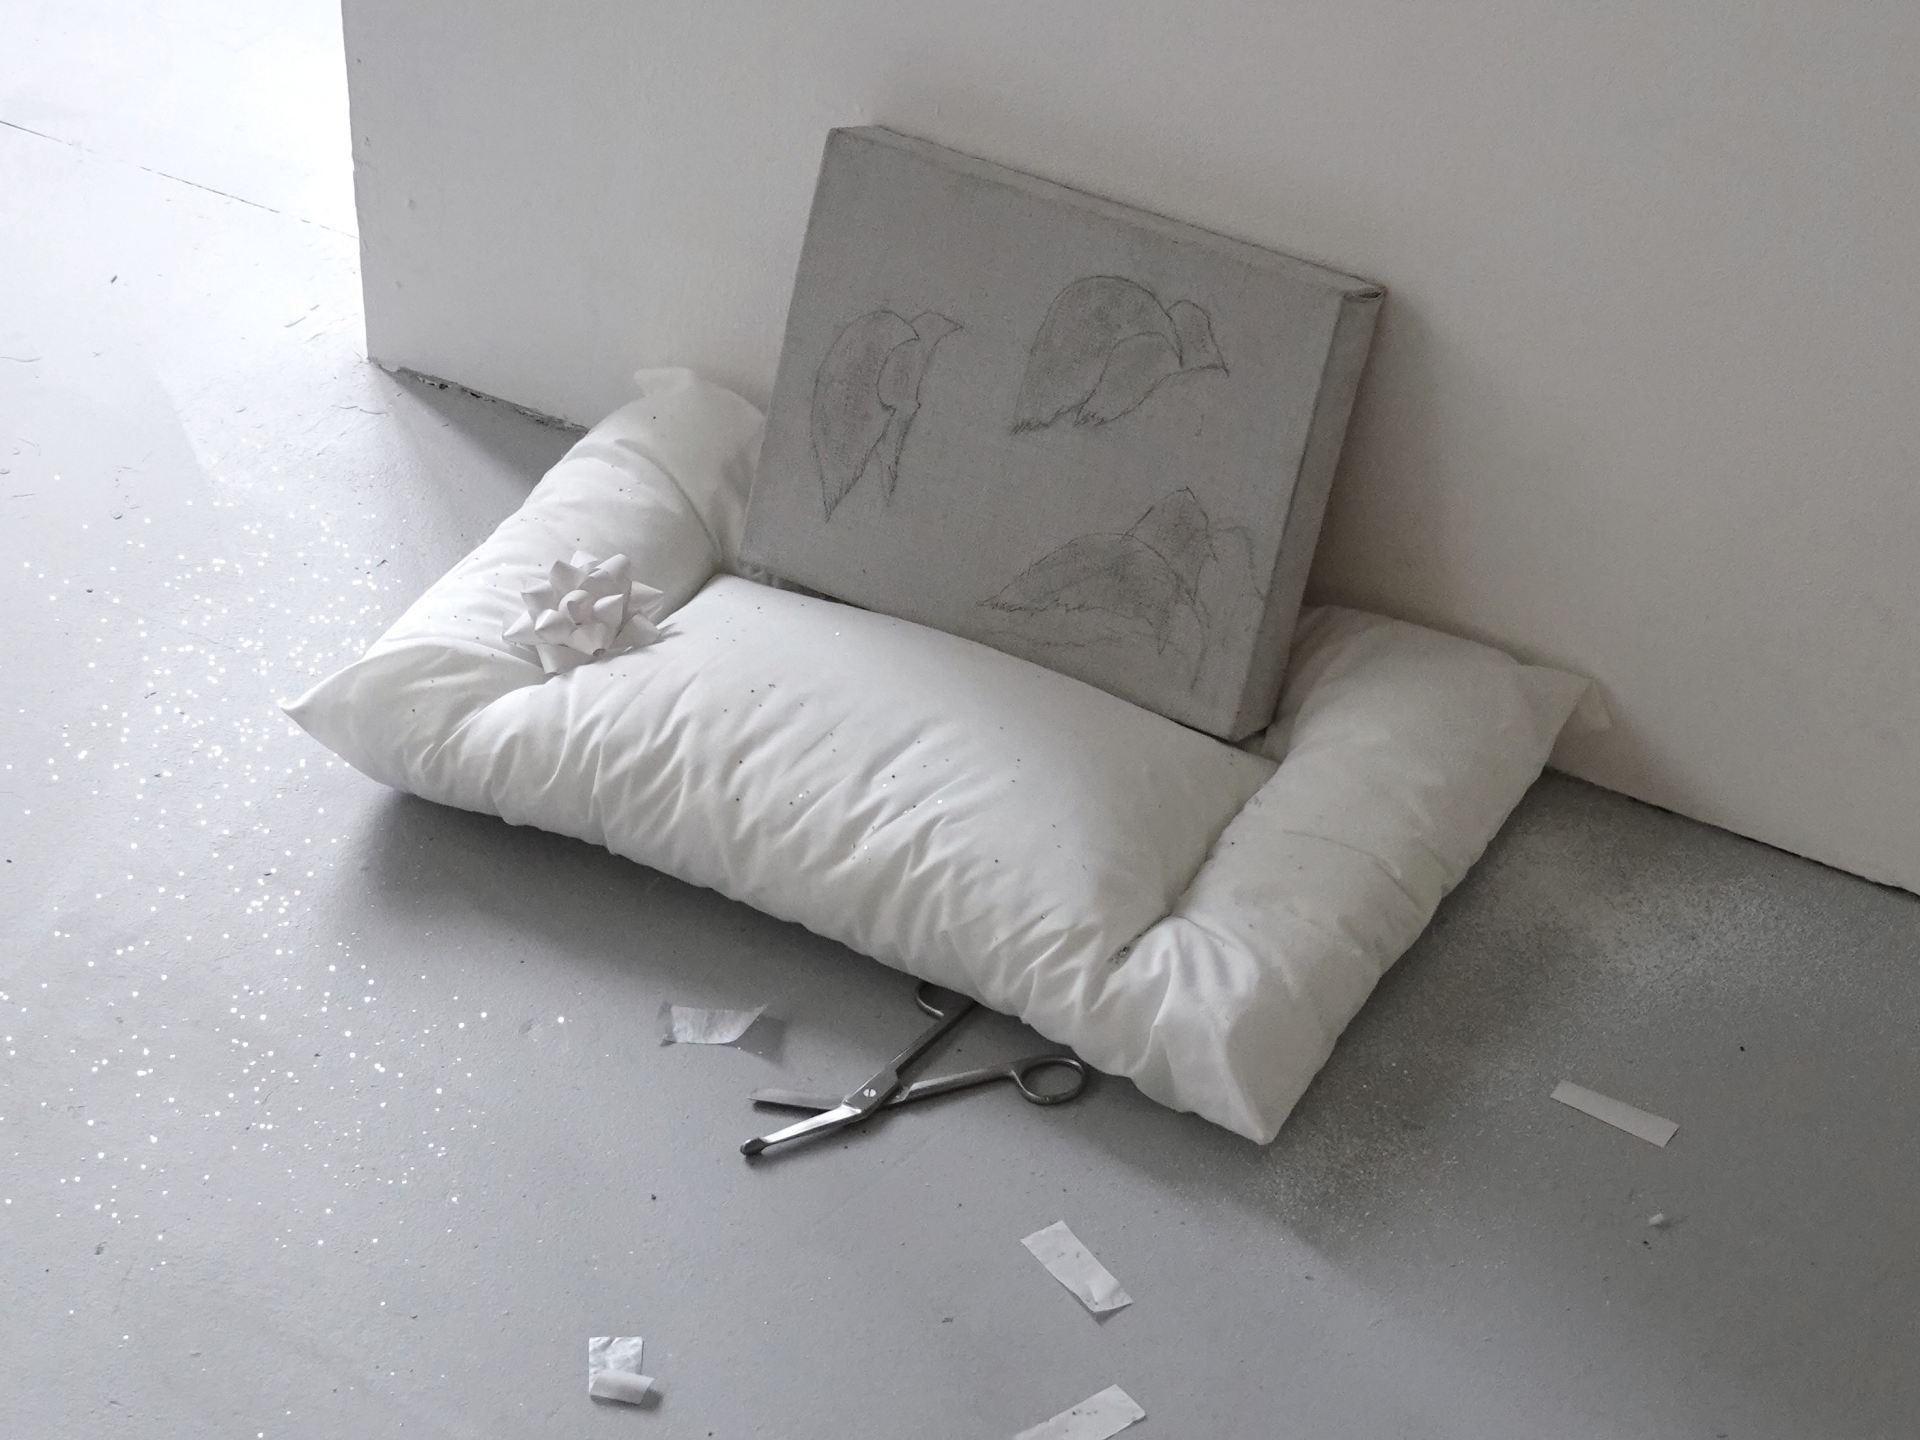 An image of a grey, cast object on a white pillow.